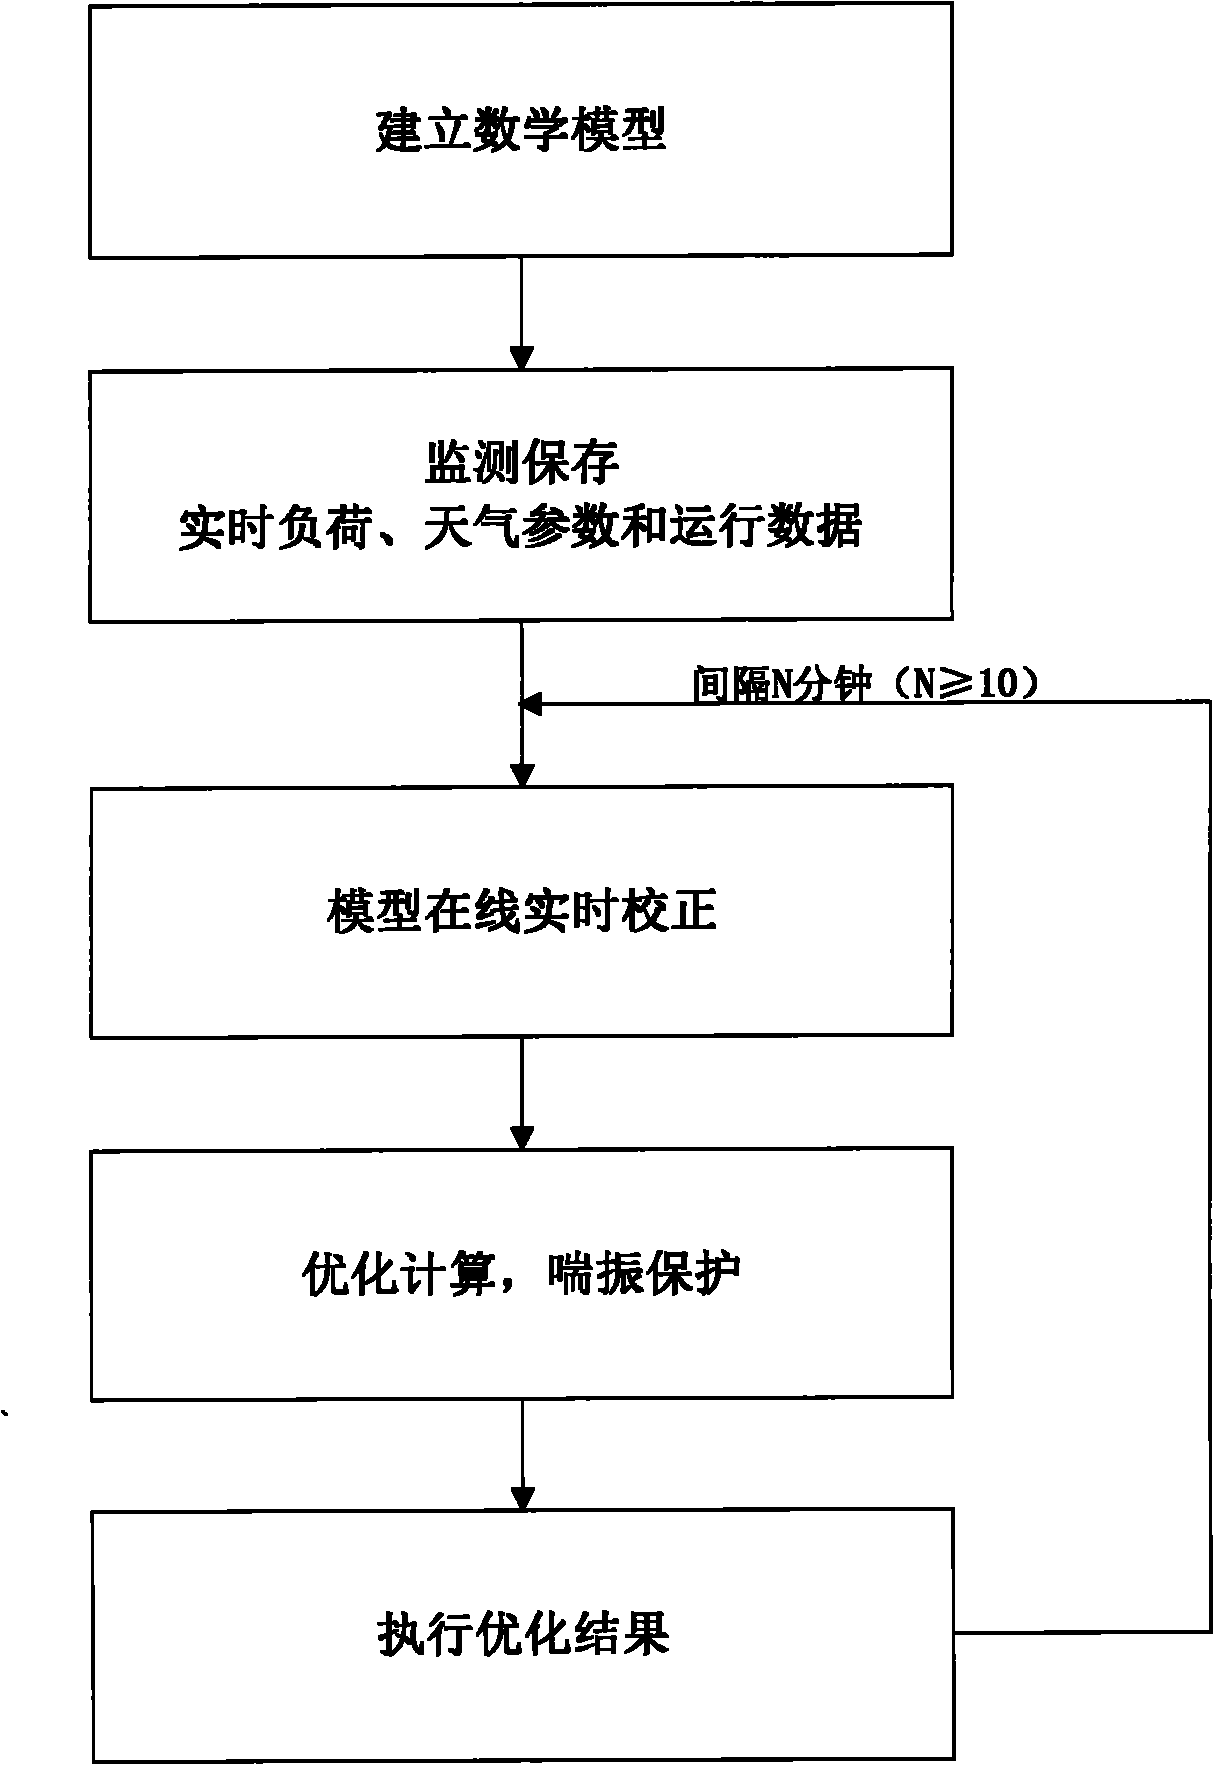 Energy-saving optimized control system and method for refrigerator room